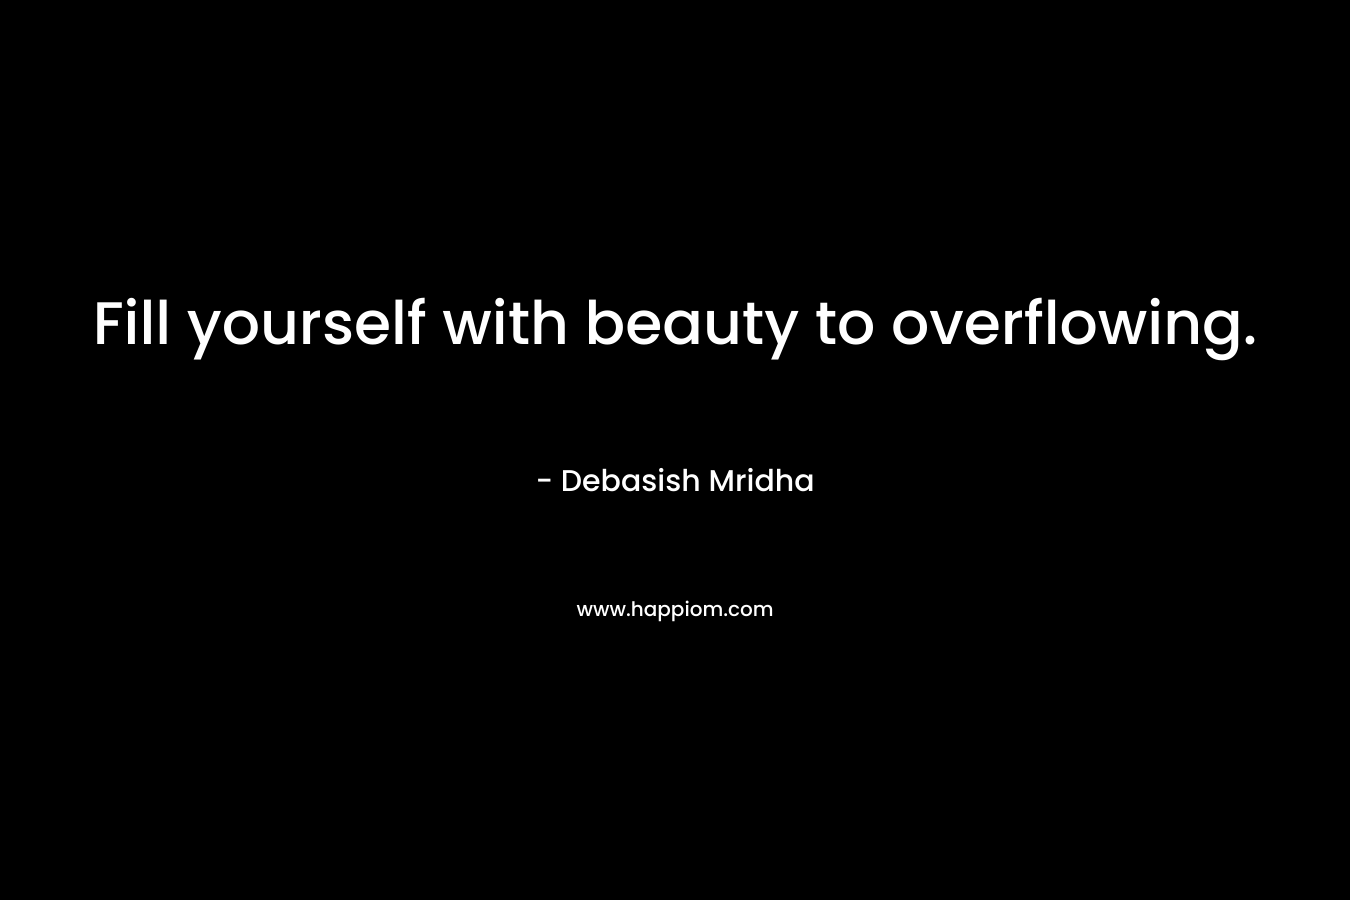 Fill yourself with beauty to overflowing.